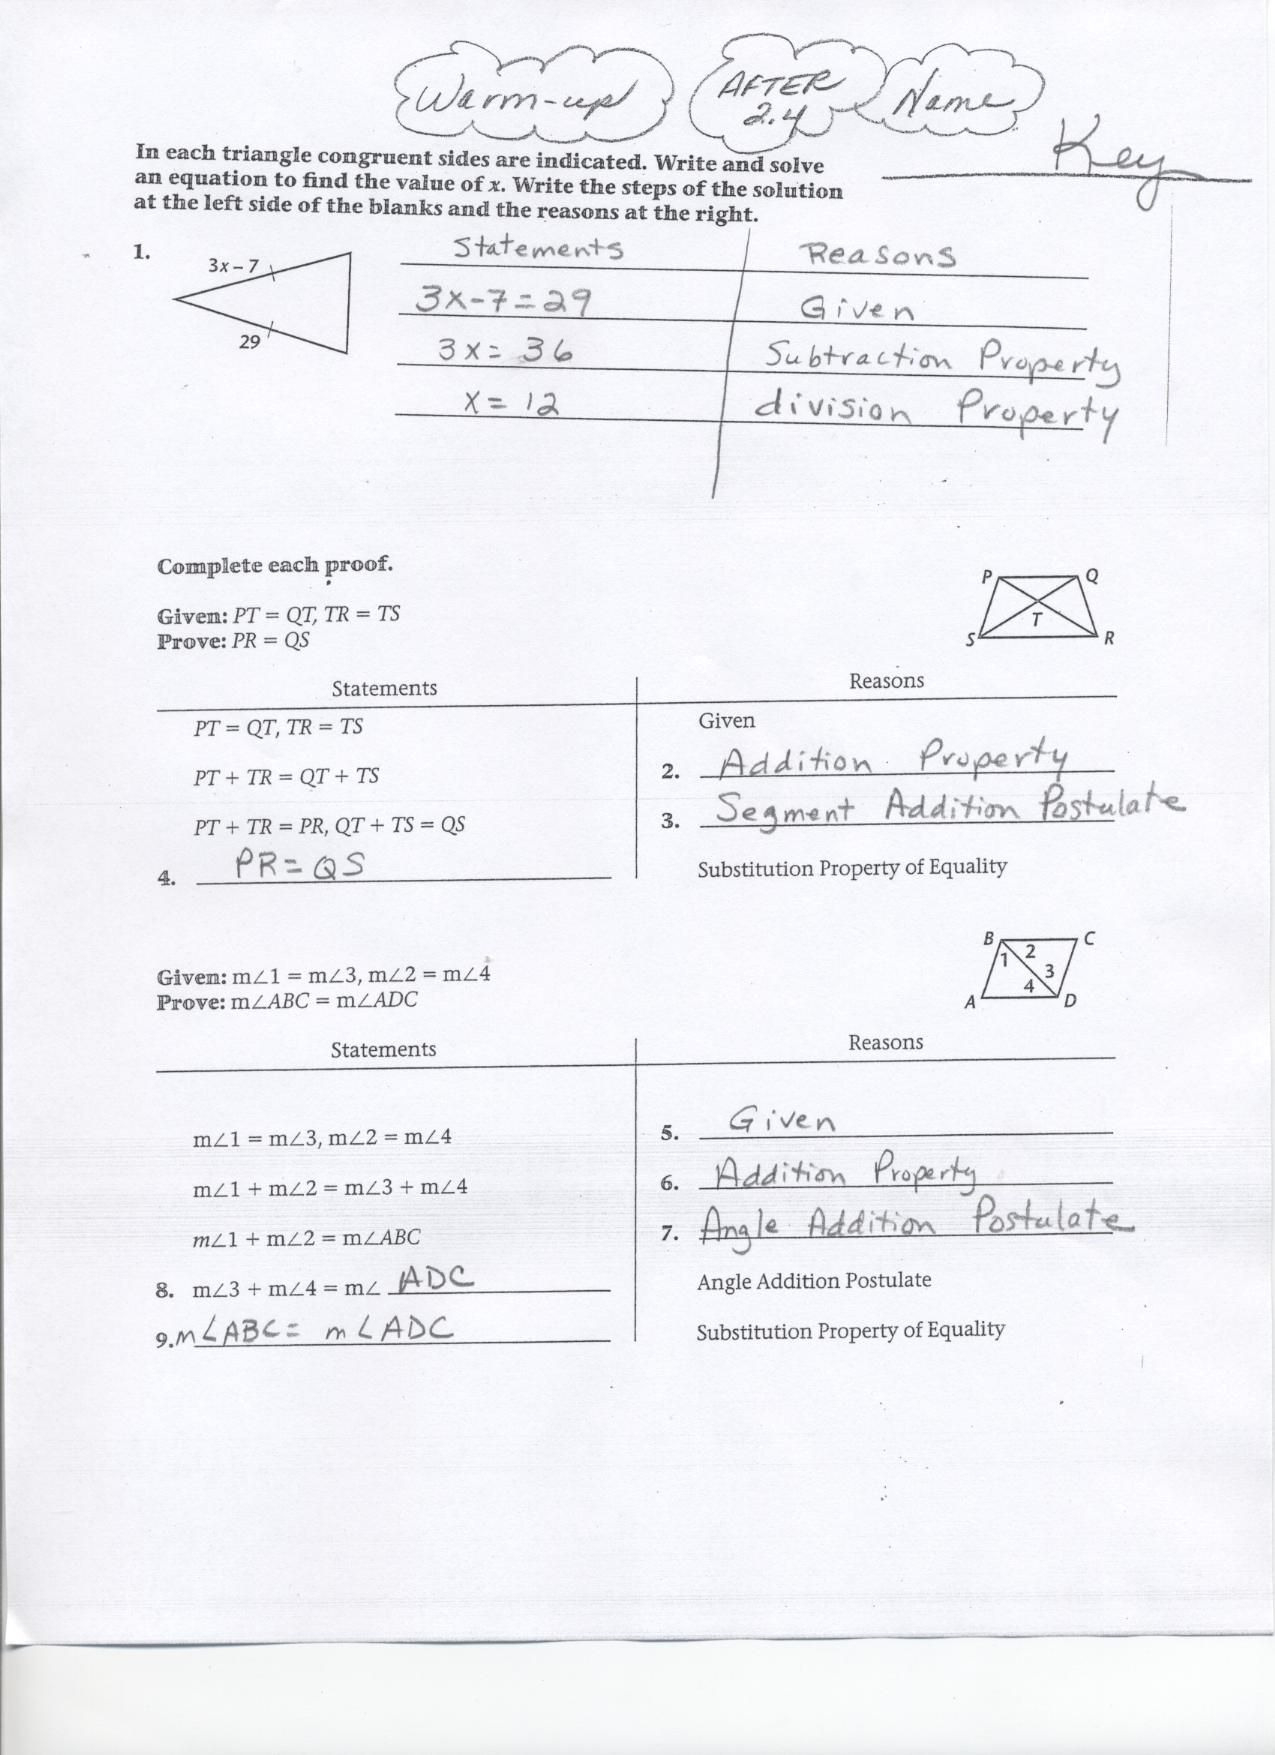 Geometry Segment And Angle Addition Worksheet Answers db excel com